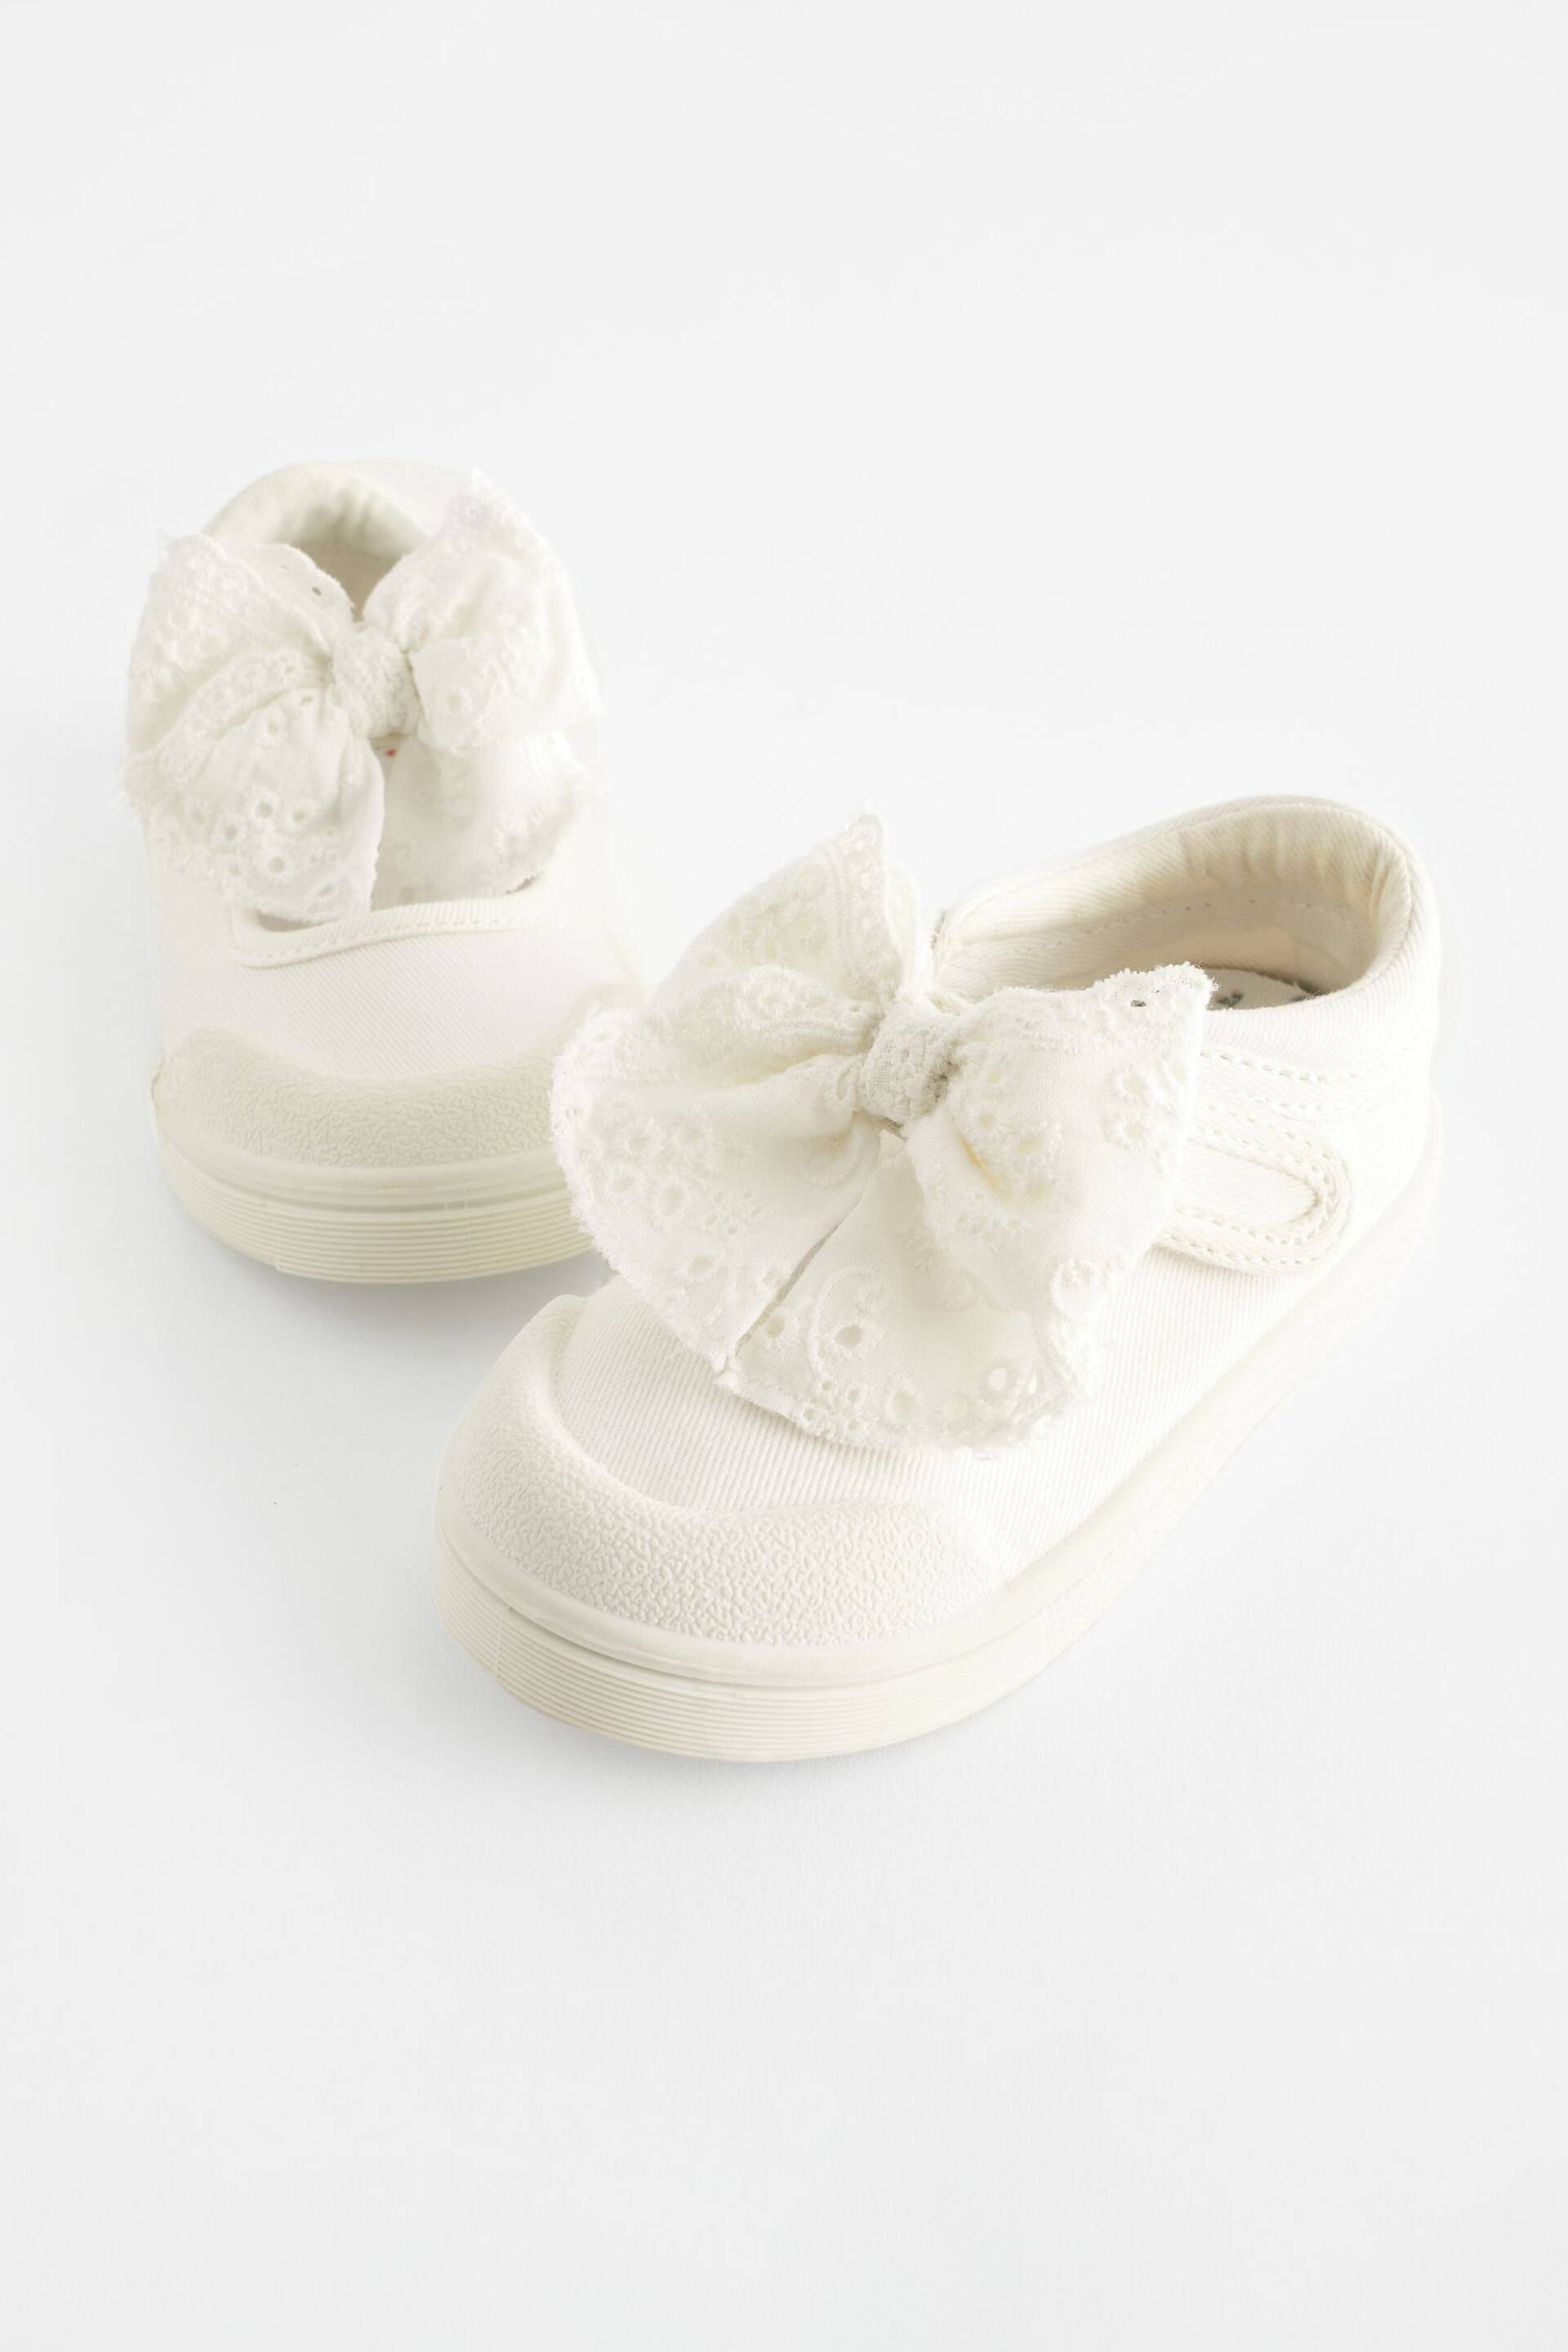 White Standard Fit (F) Machine Washable Mary Jane Shoes - Image 5 of 6